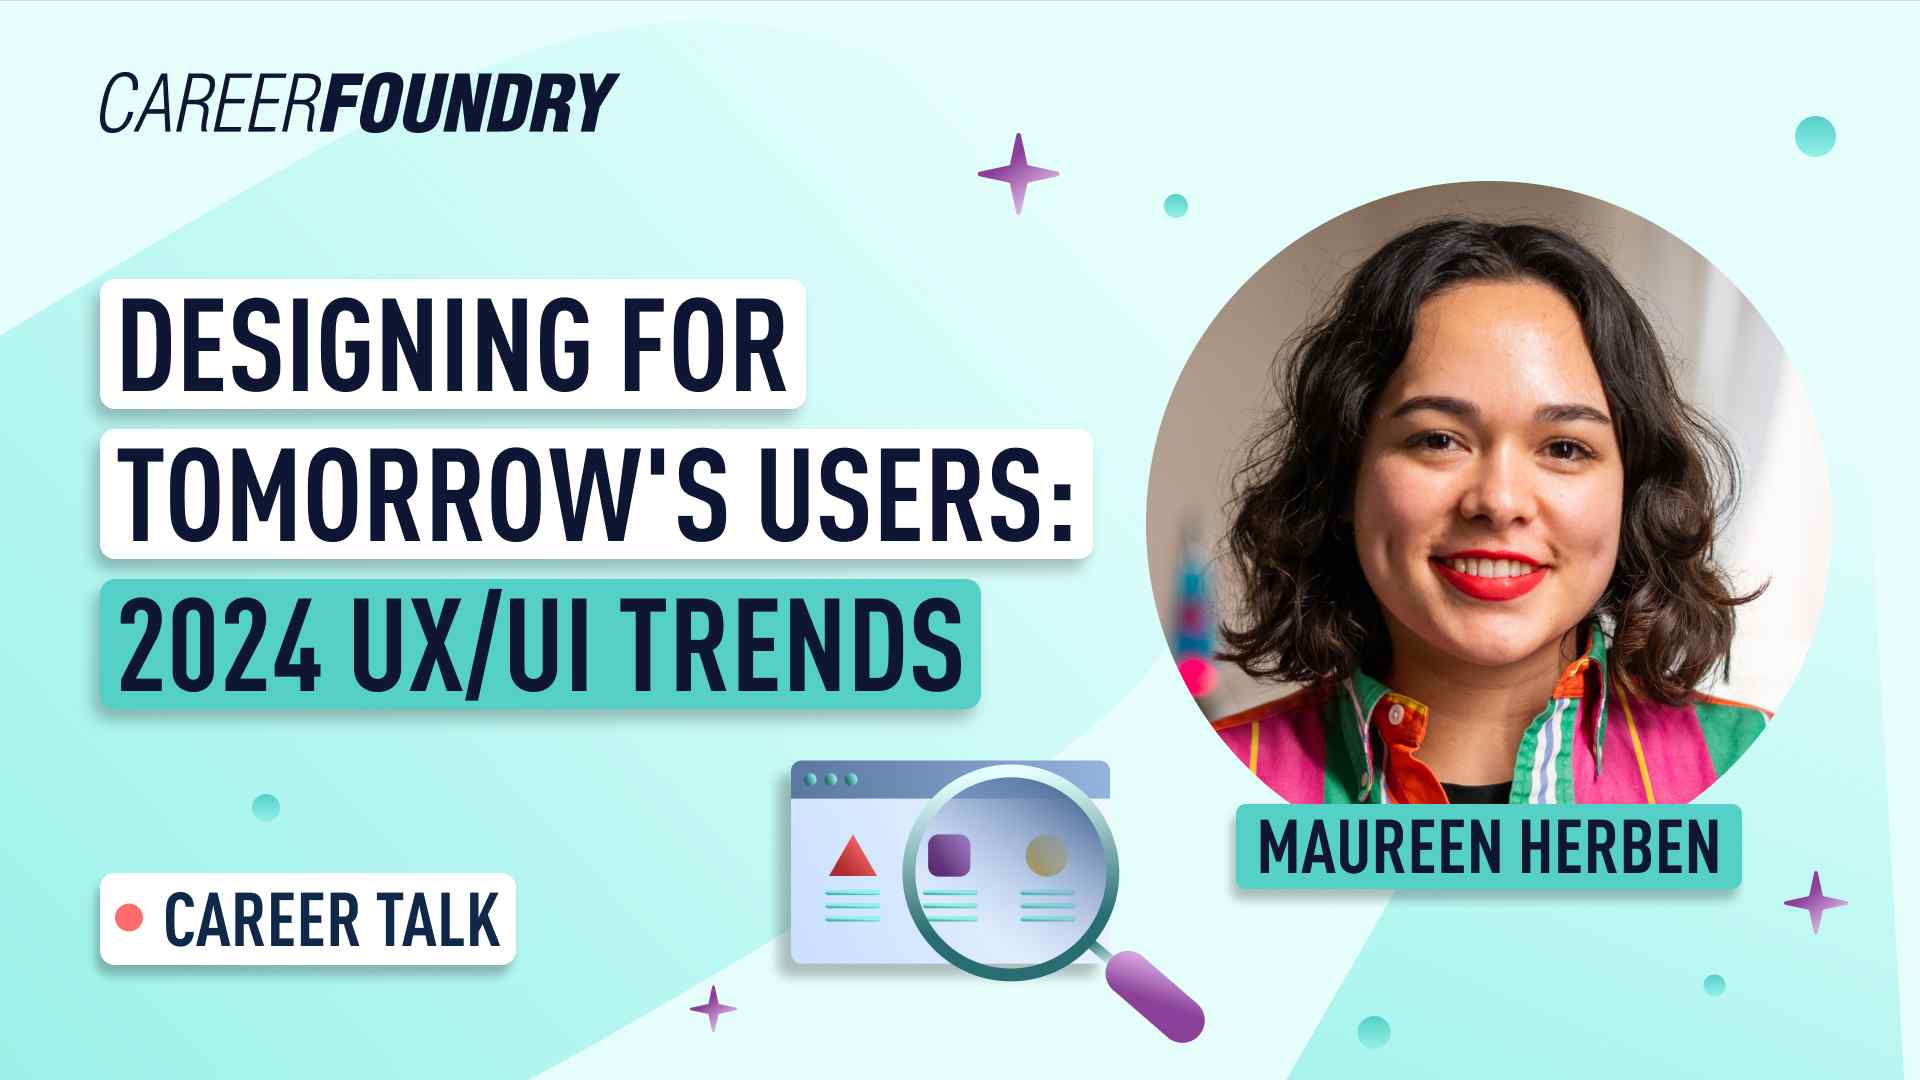 Designing for Tomorrow's Users: 2024 UX/UI Design Trends